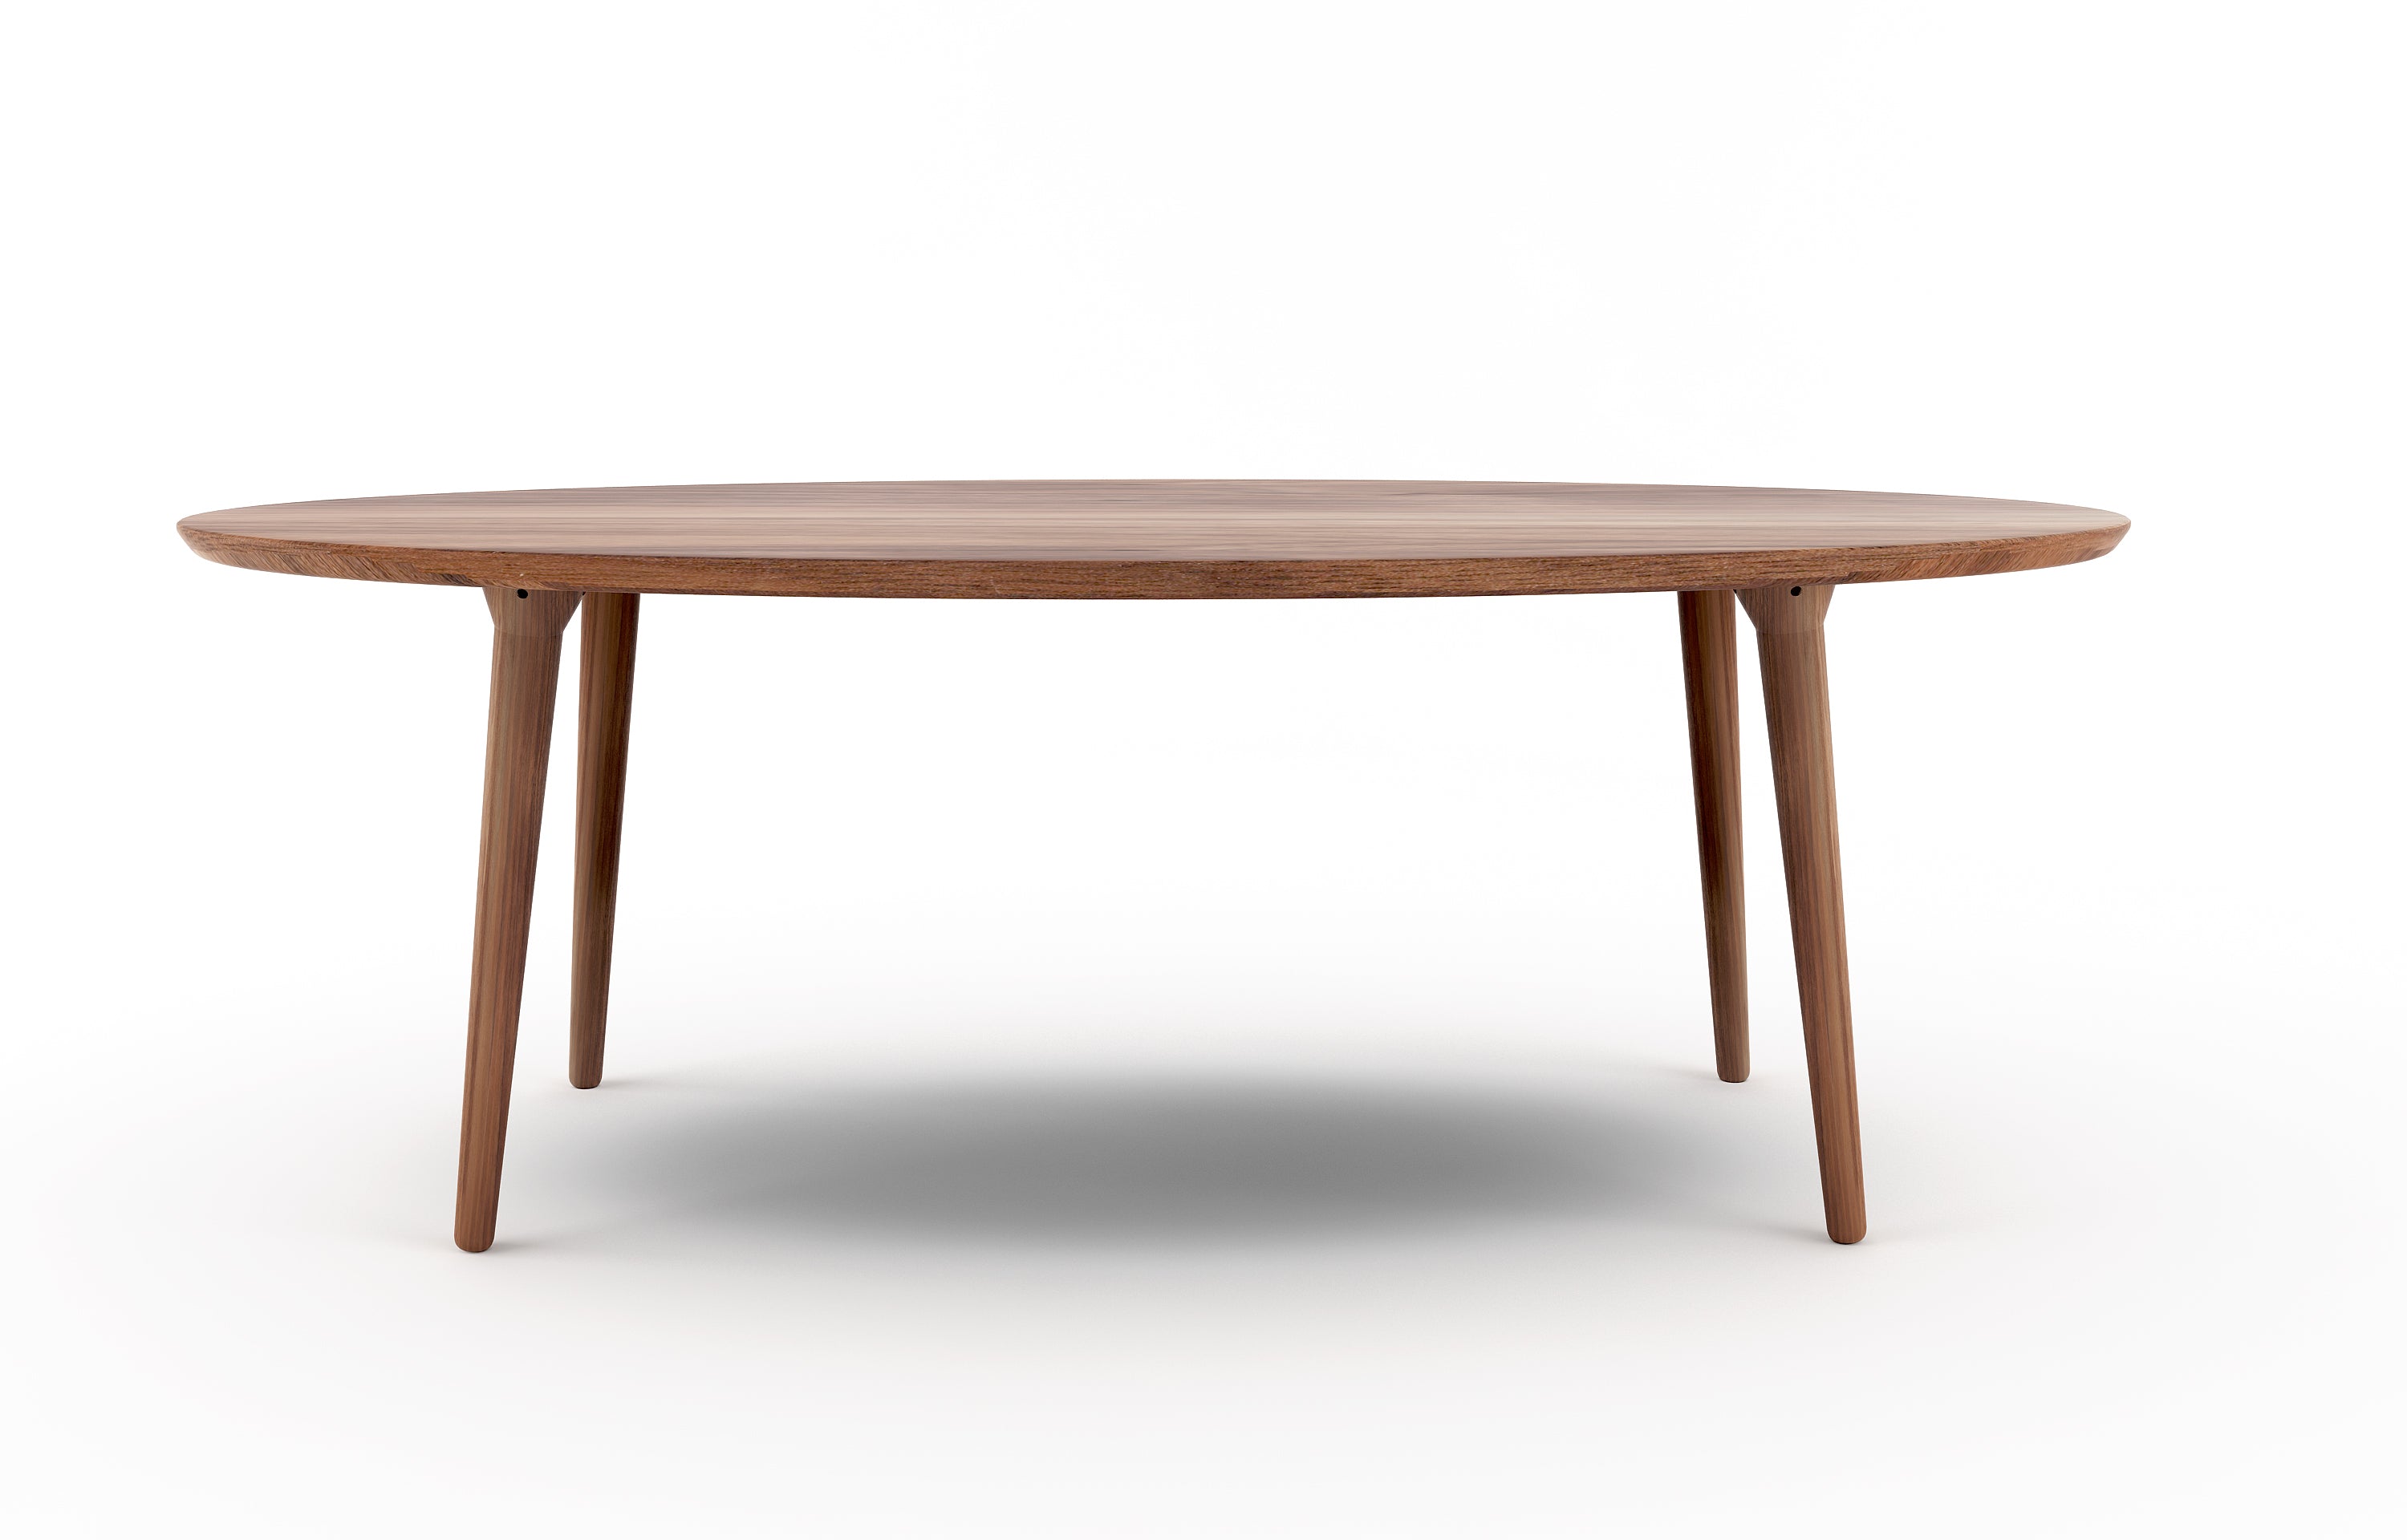 Voya Oval Dining Table in Walnut from side